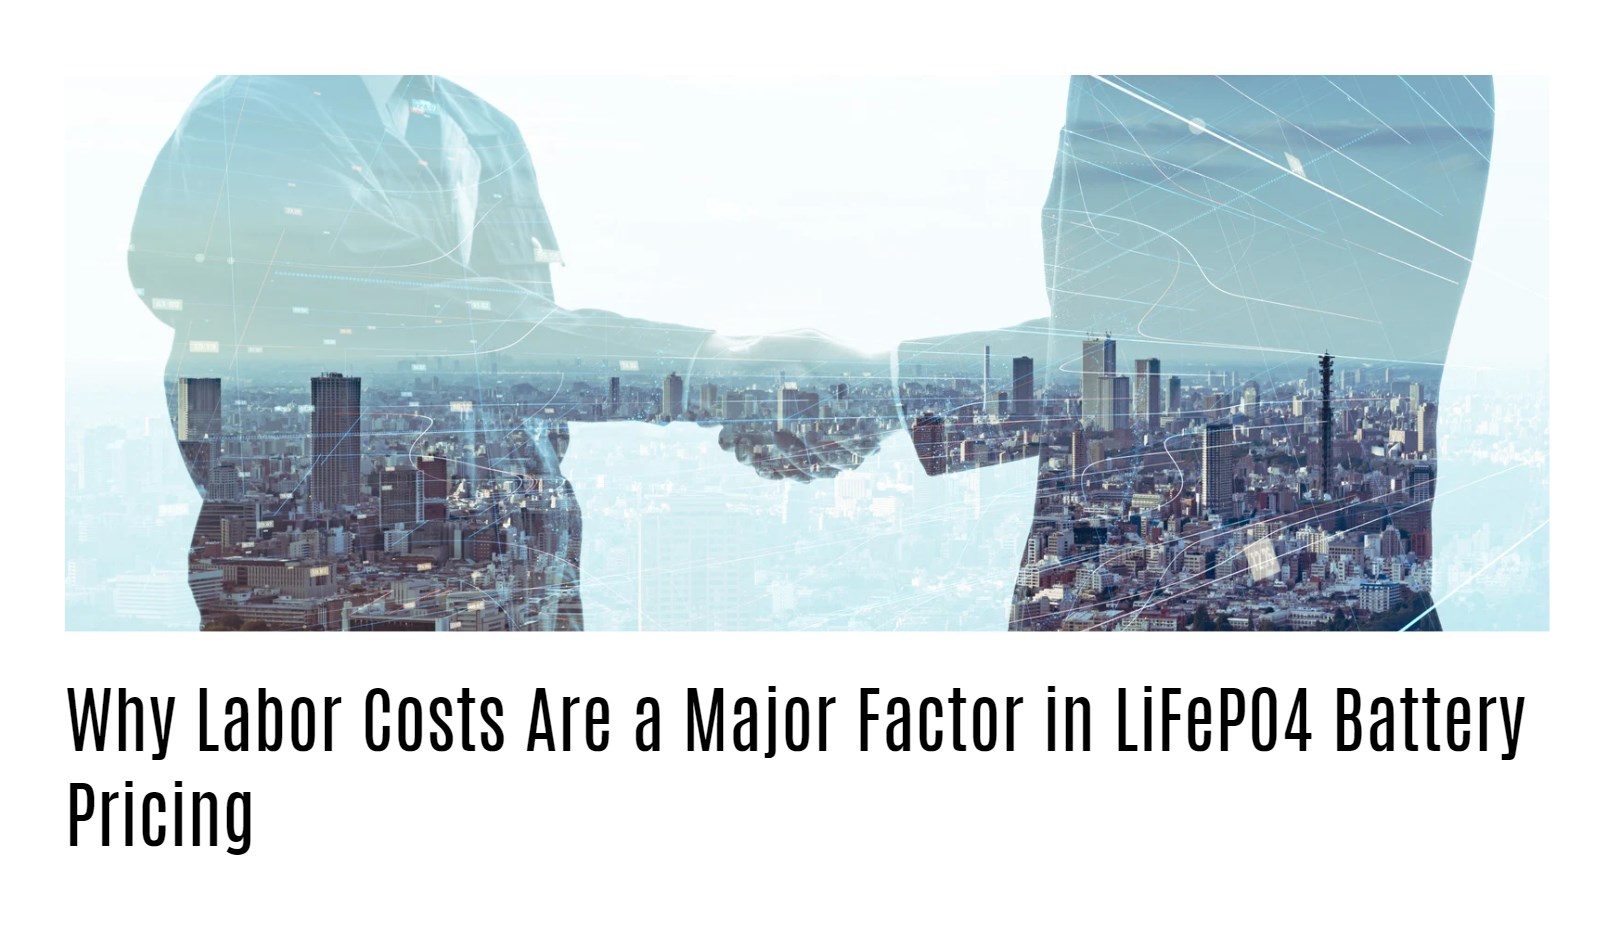 Why Labor Costs Are a Major Factor in LiFePO4 Battery Pricing